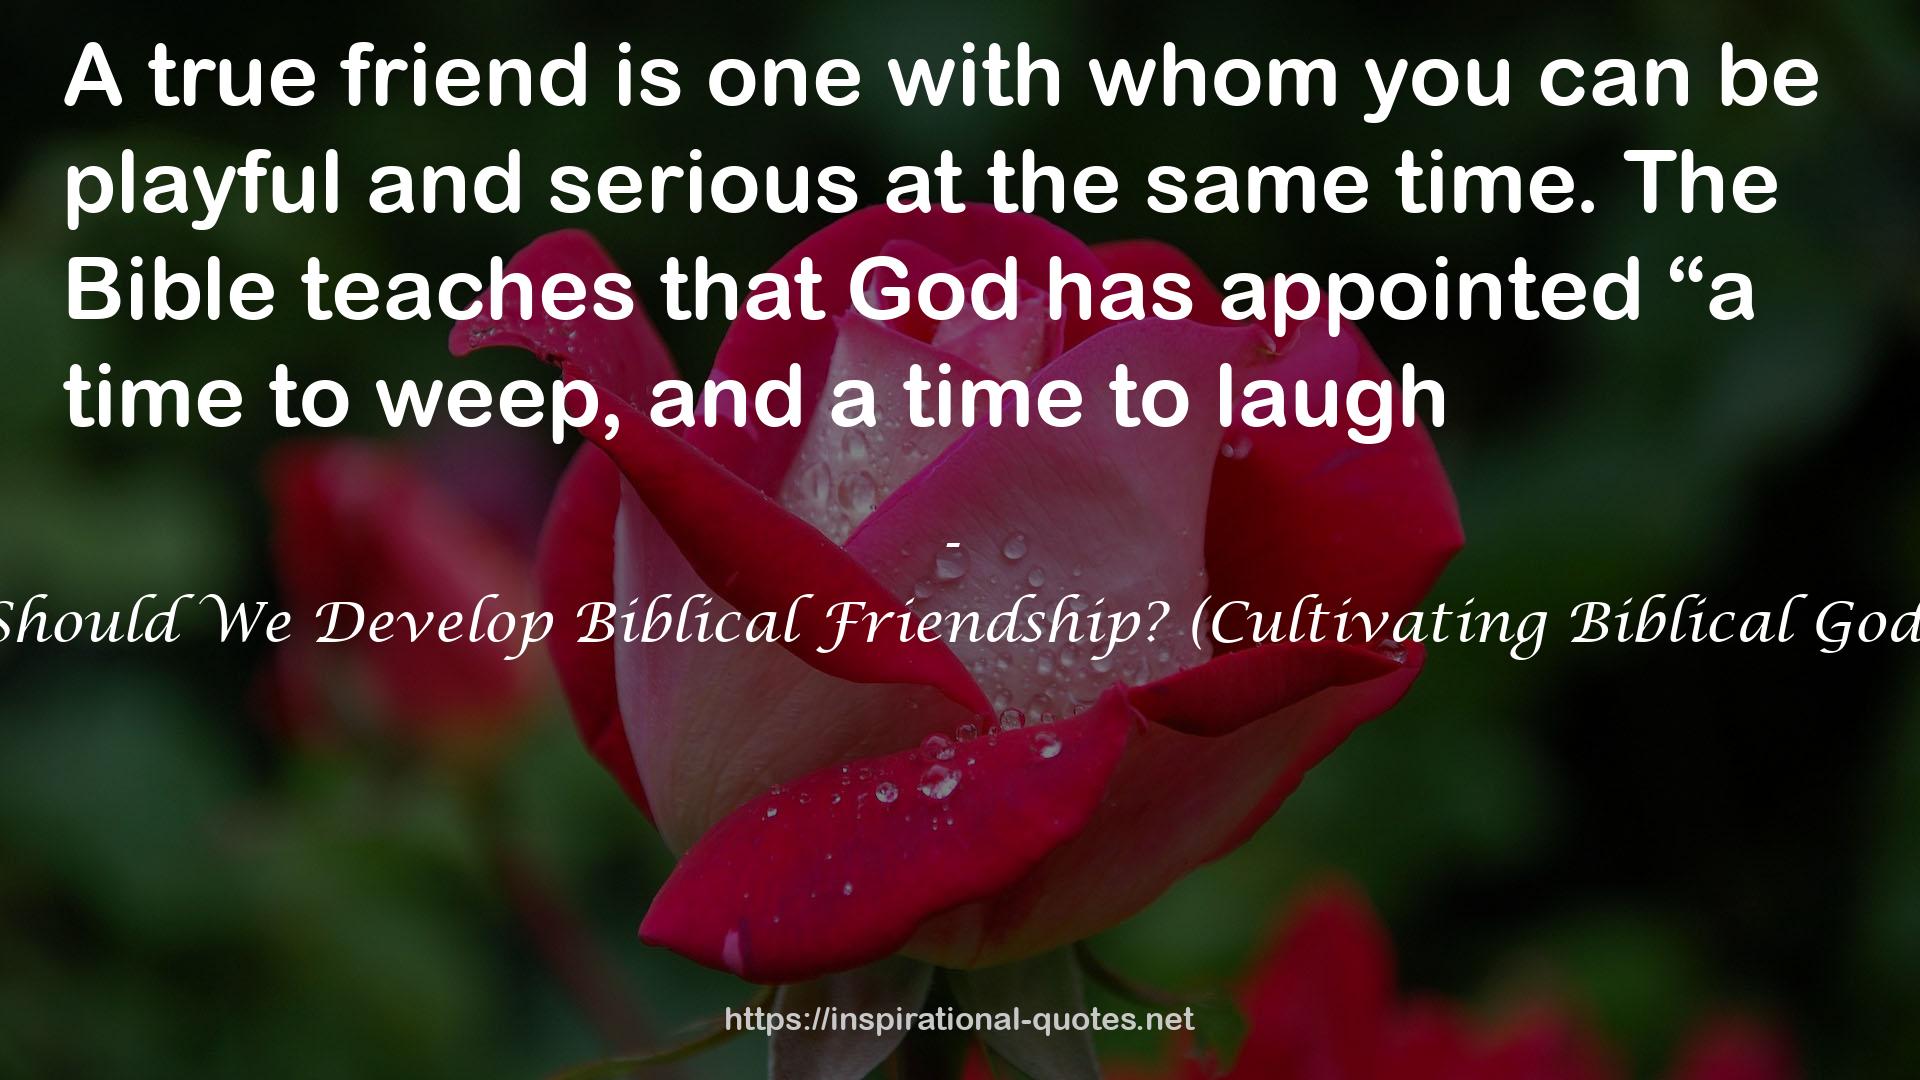 How Should We Develop Biblical Friendship? (Cultivating Biblical Godliness) QUOTES